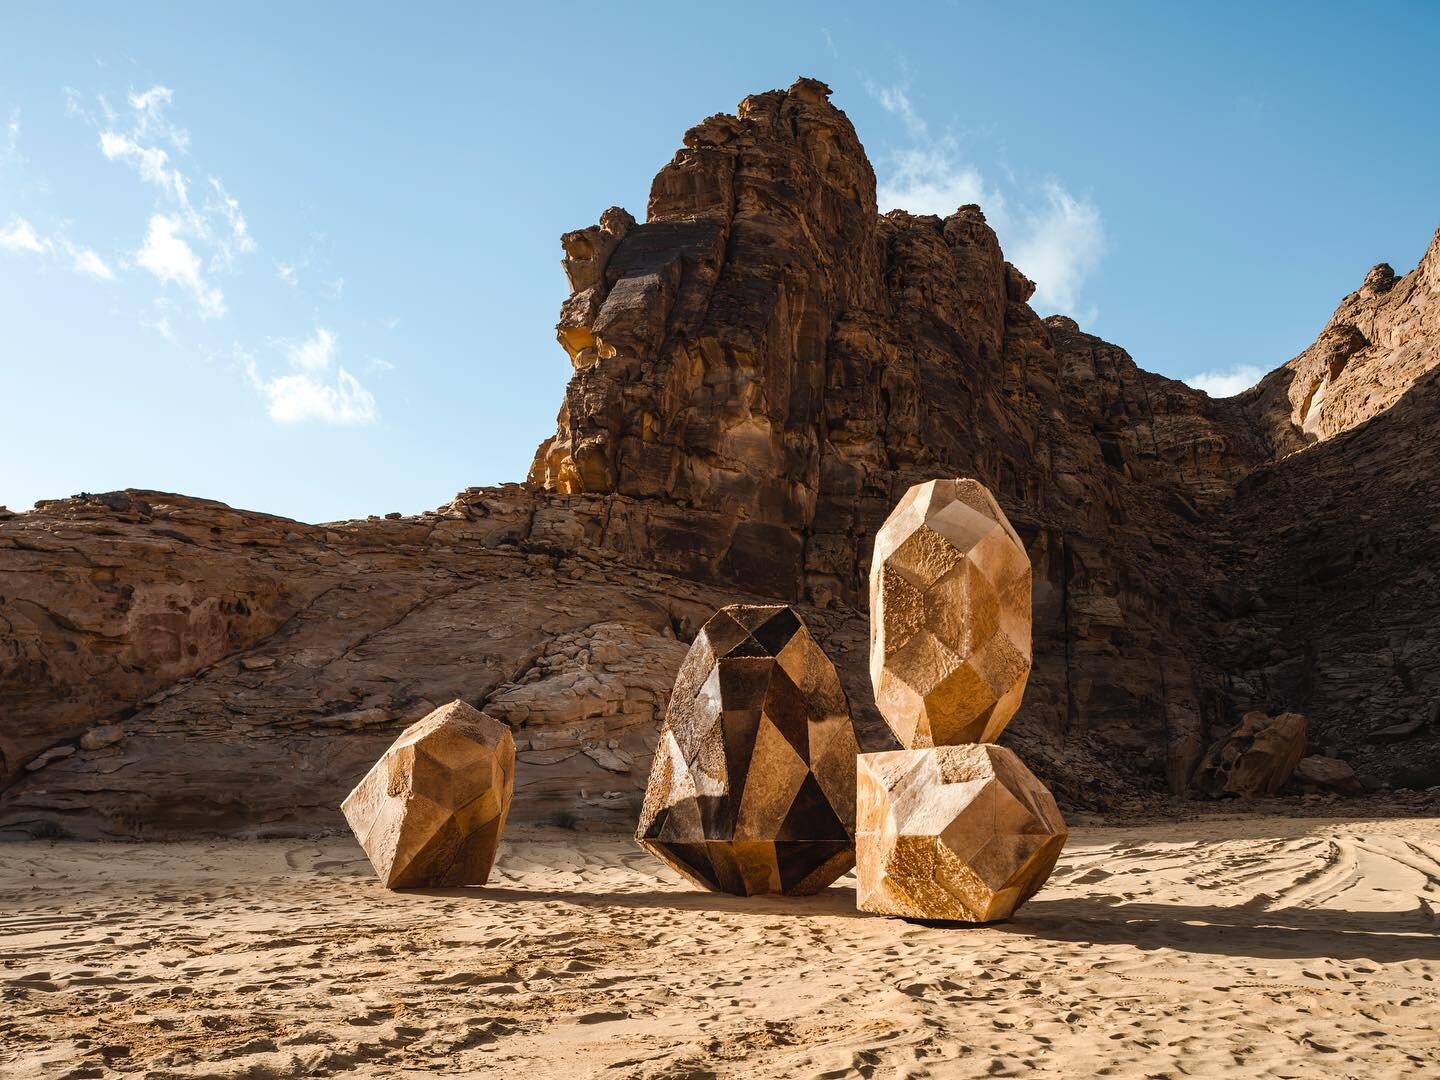 Desert X AlUla returns for its second edition from 11 February &ndash; 30 March 2022, placing visionary contemporary artworks by 15 Saudi and international artists amidst the extraordinary desert landscape of AlUla, a majestic region in north-west Sa